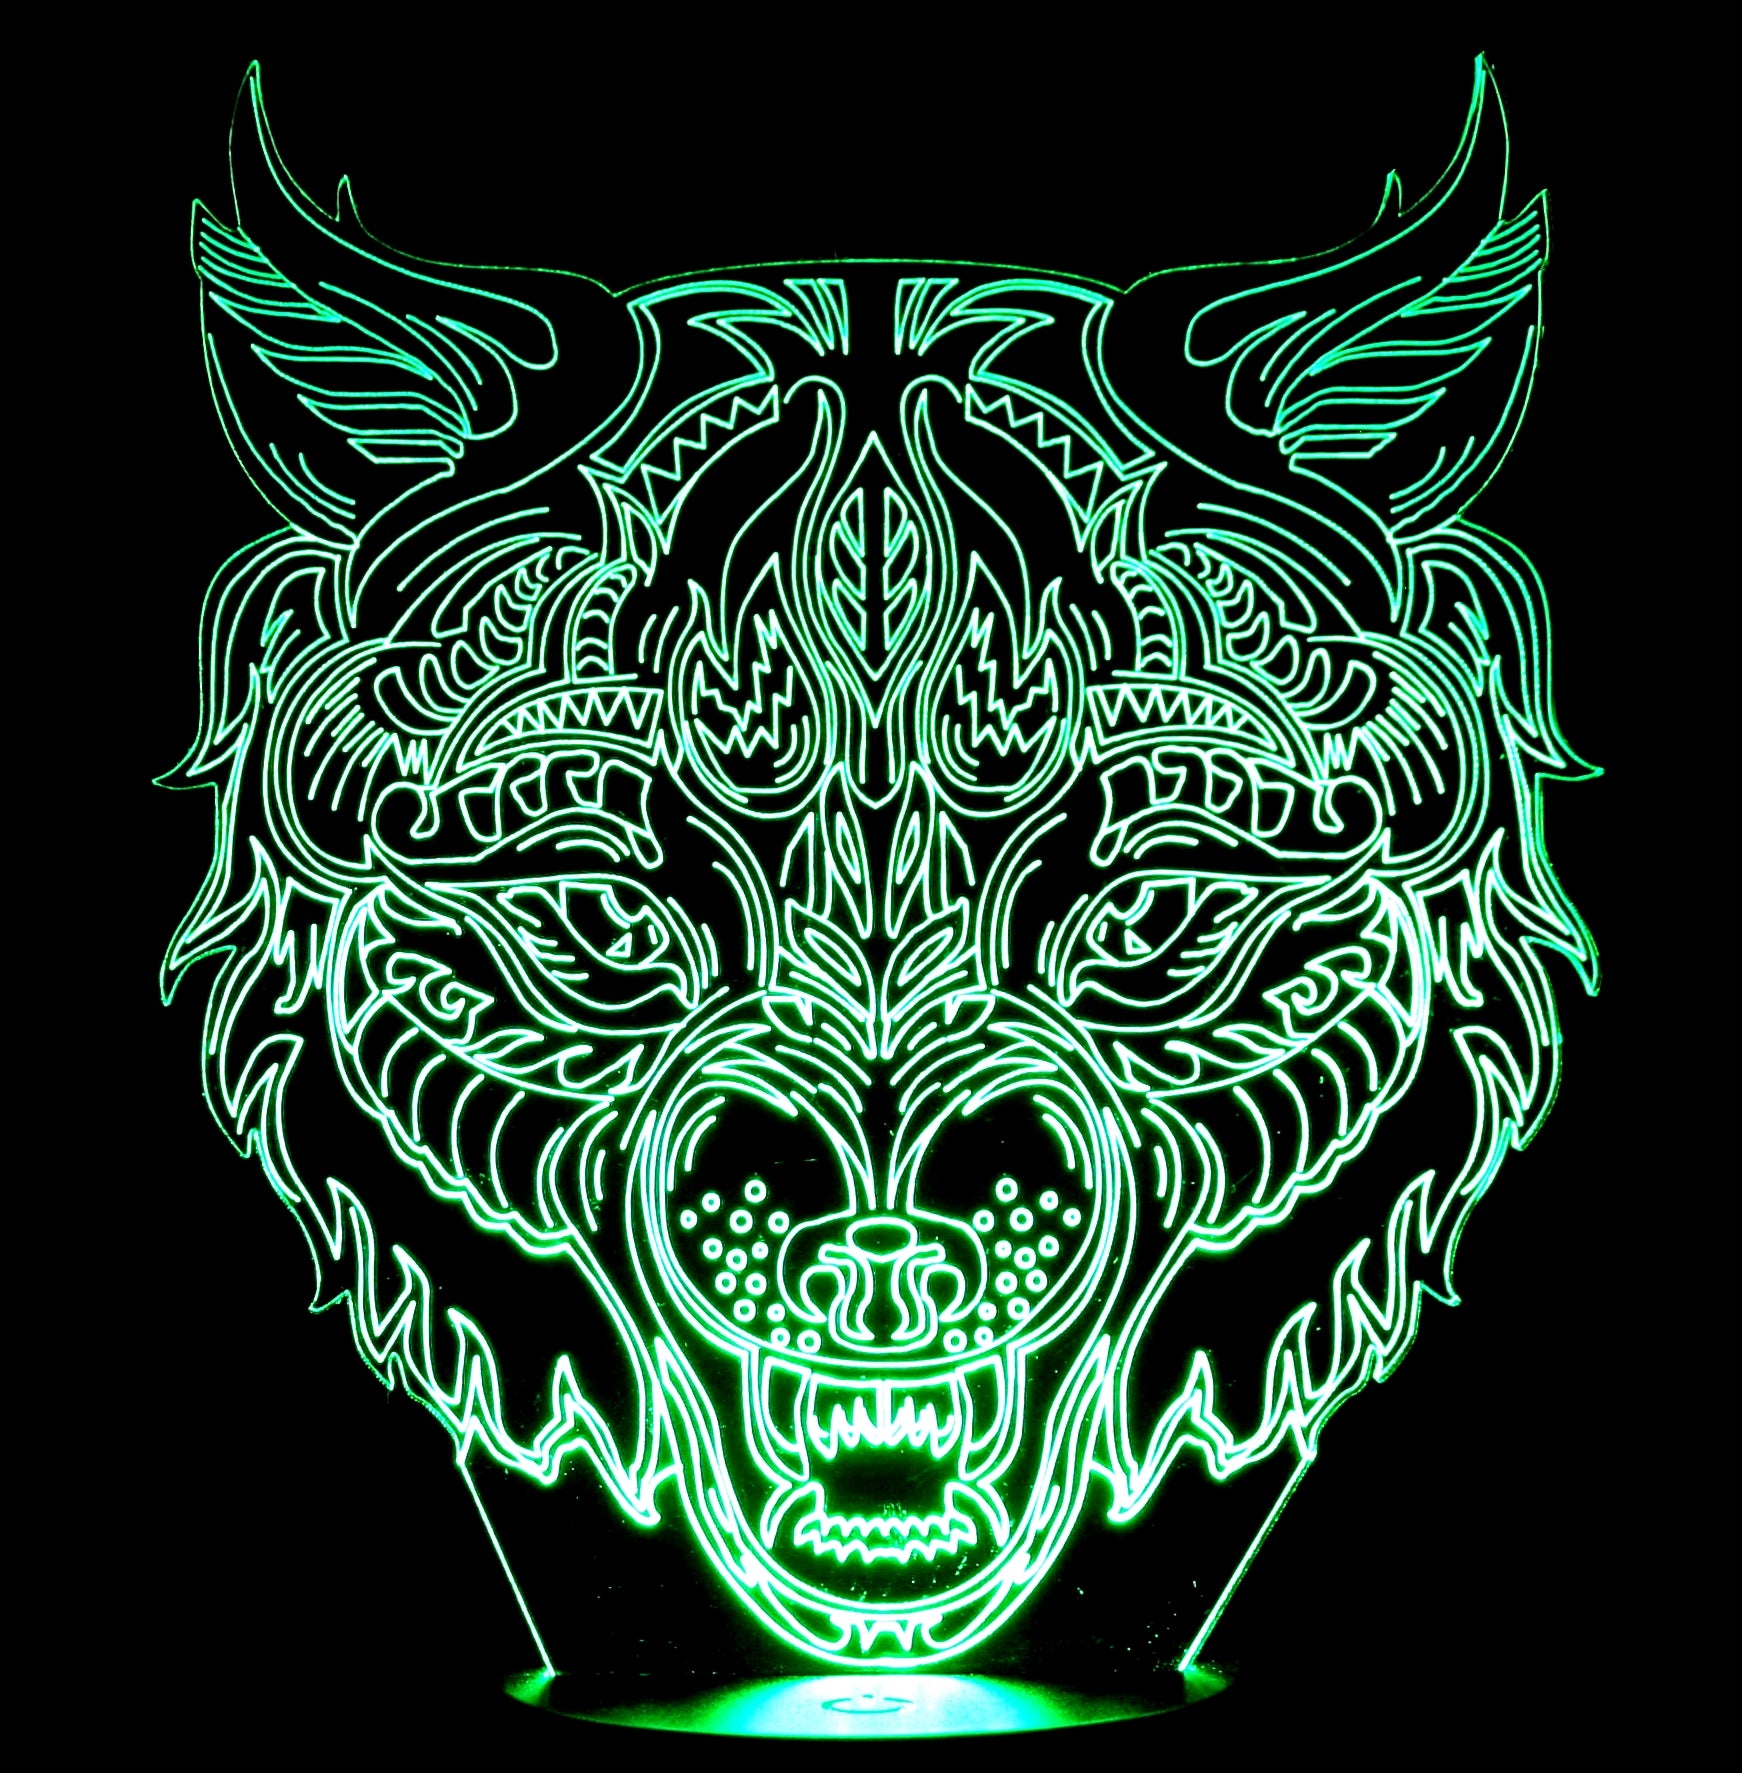 Wolf Angry Image 3-D Optical Illusion Multicolored Lamp